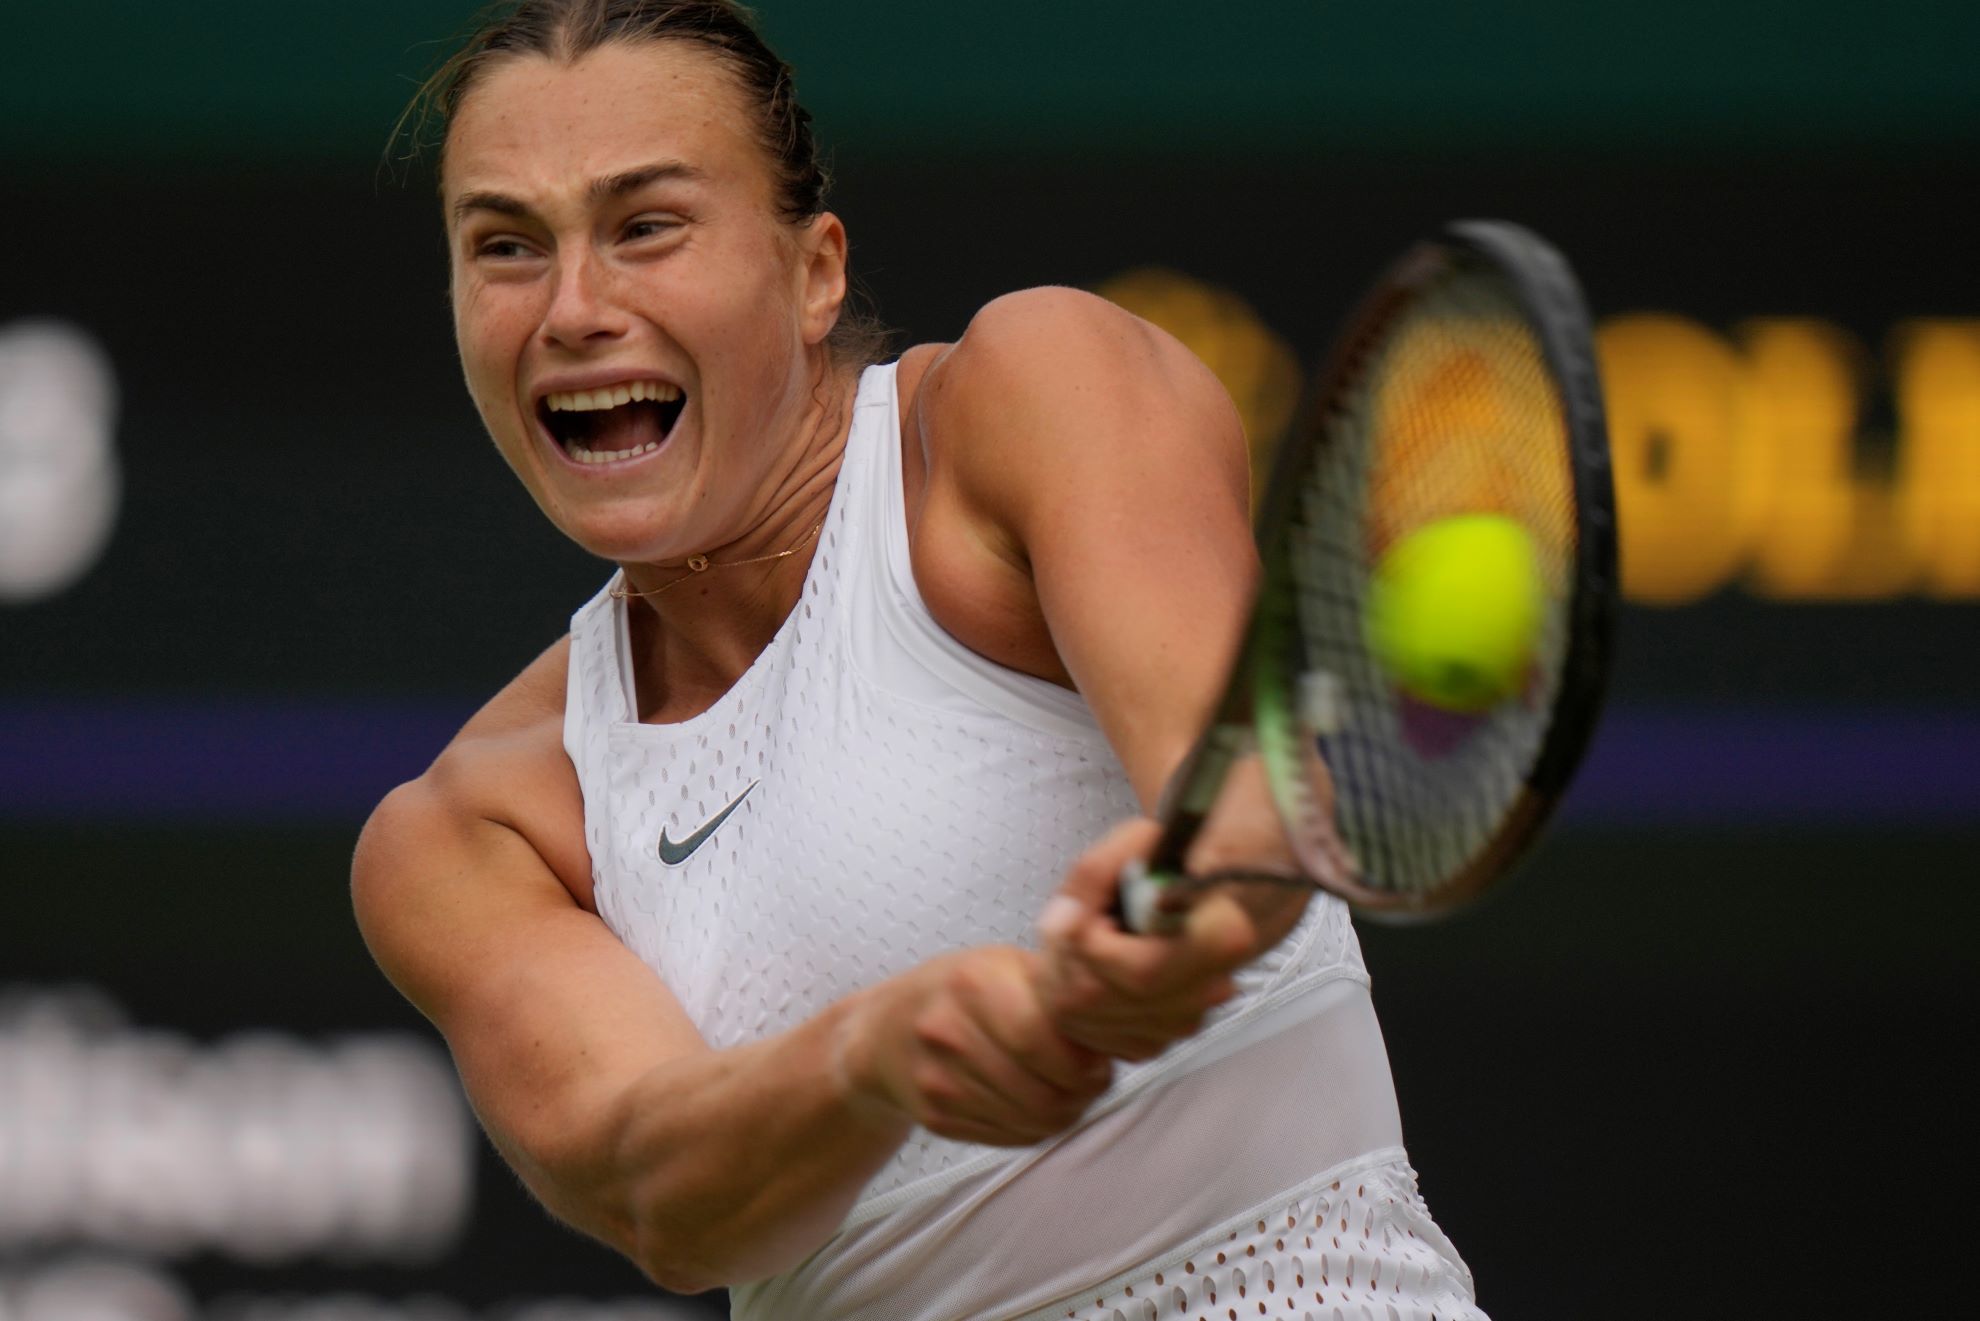 Aryna Sabalenka moves into Wimbledon semi-finals and is one win away from becoming the new number one